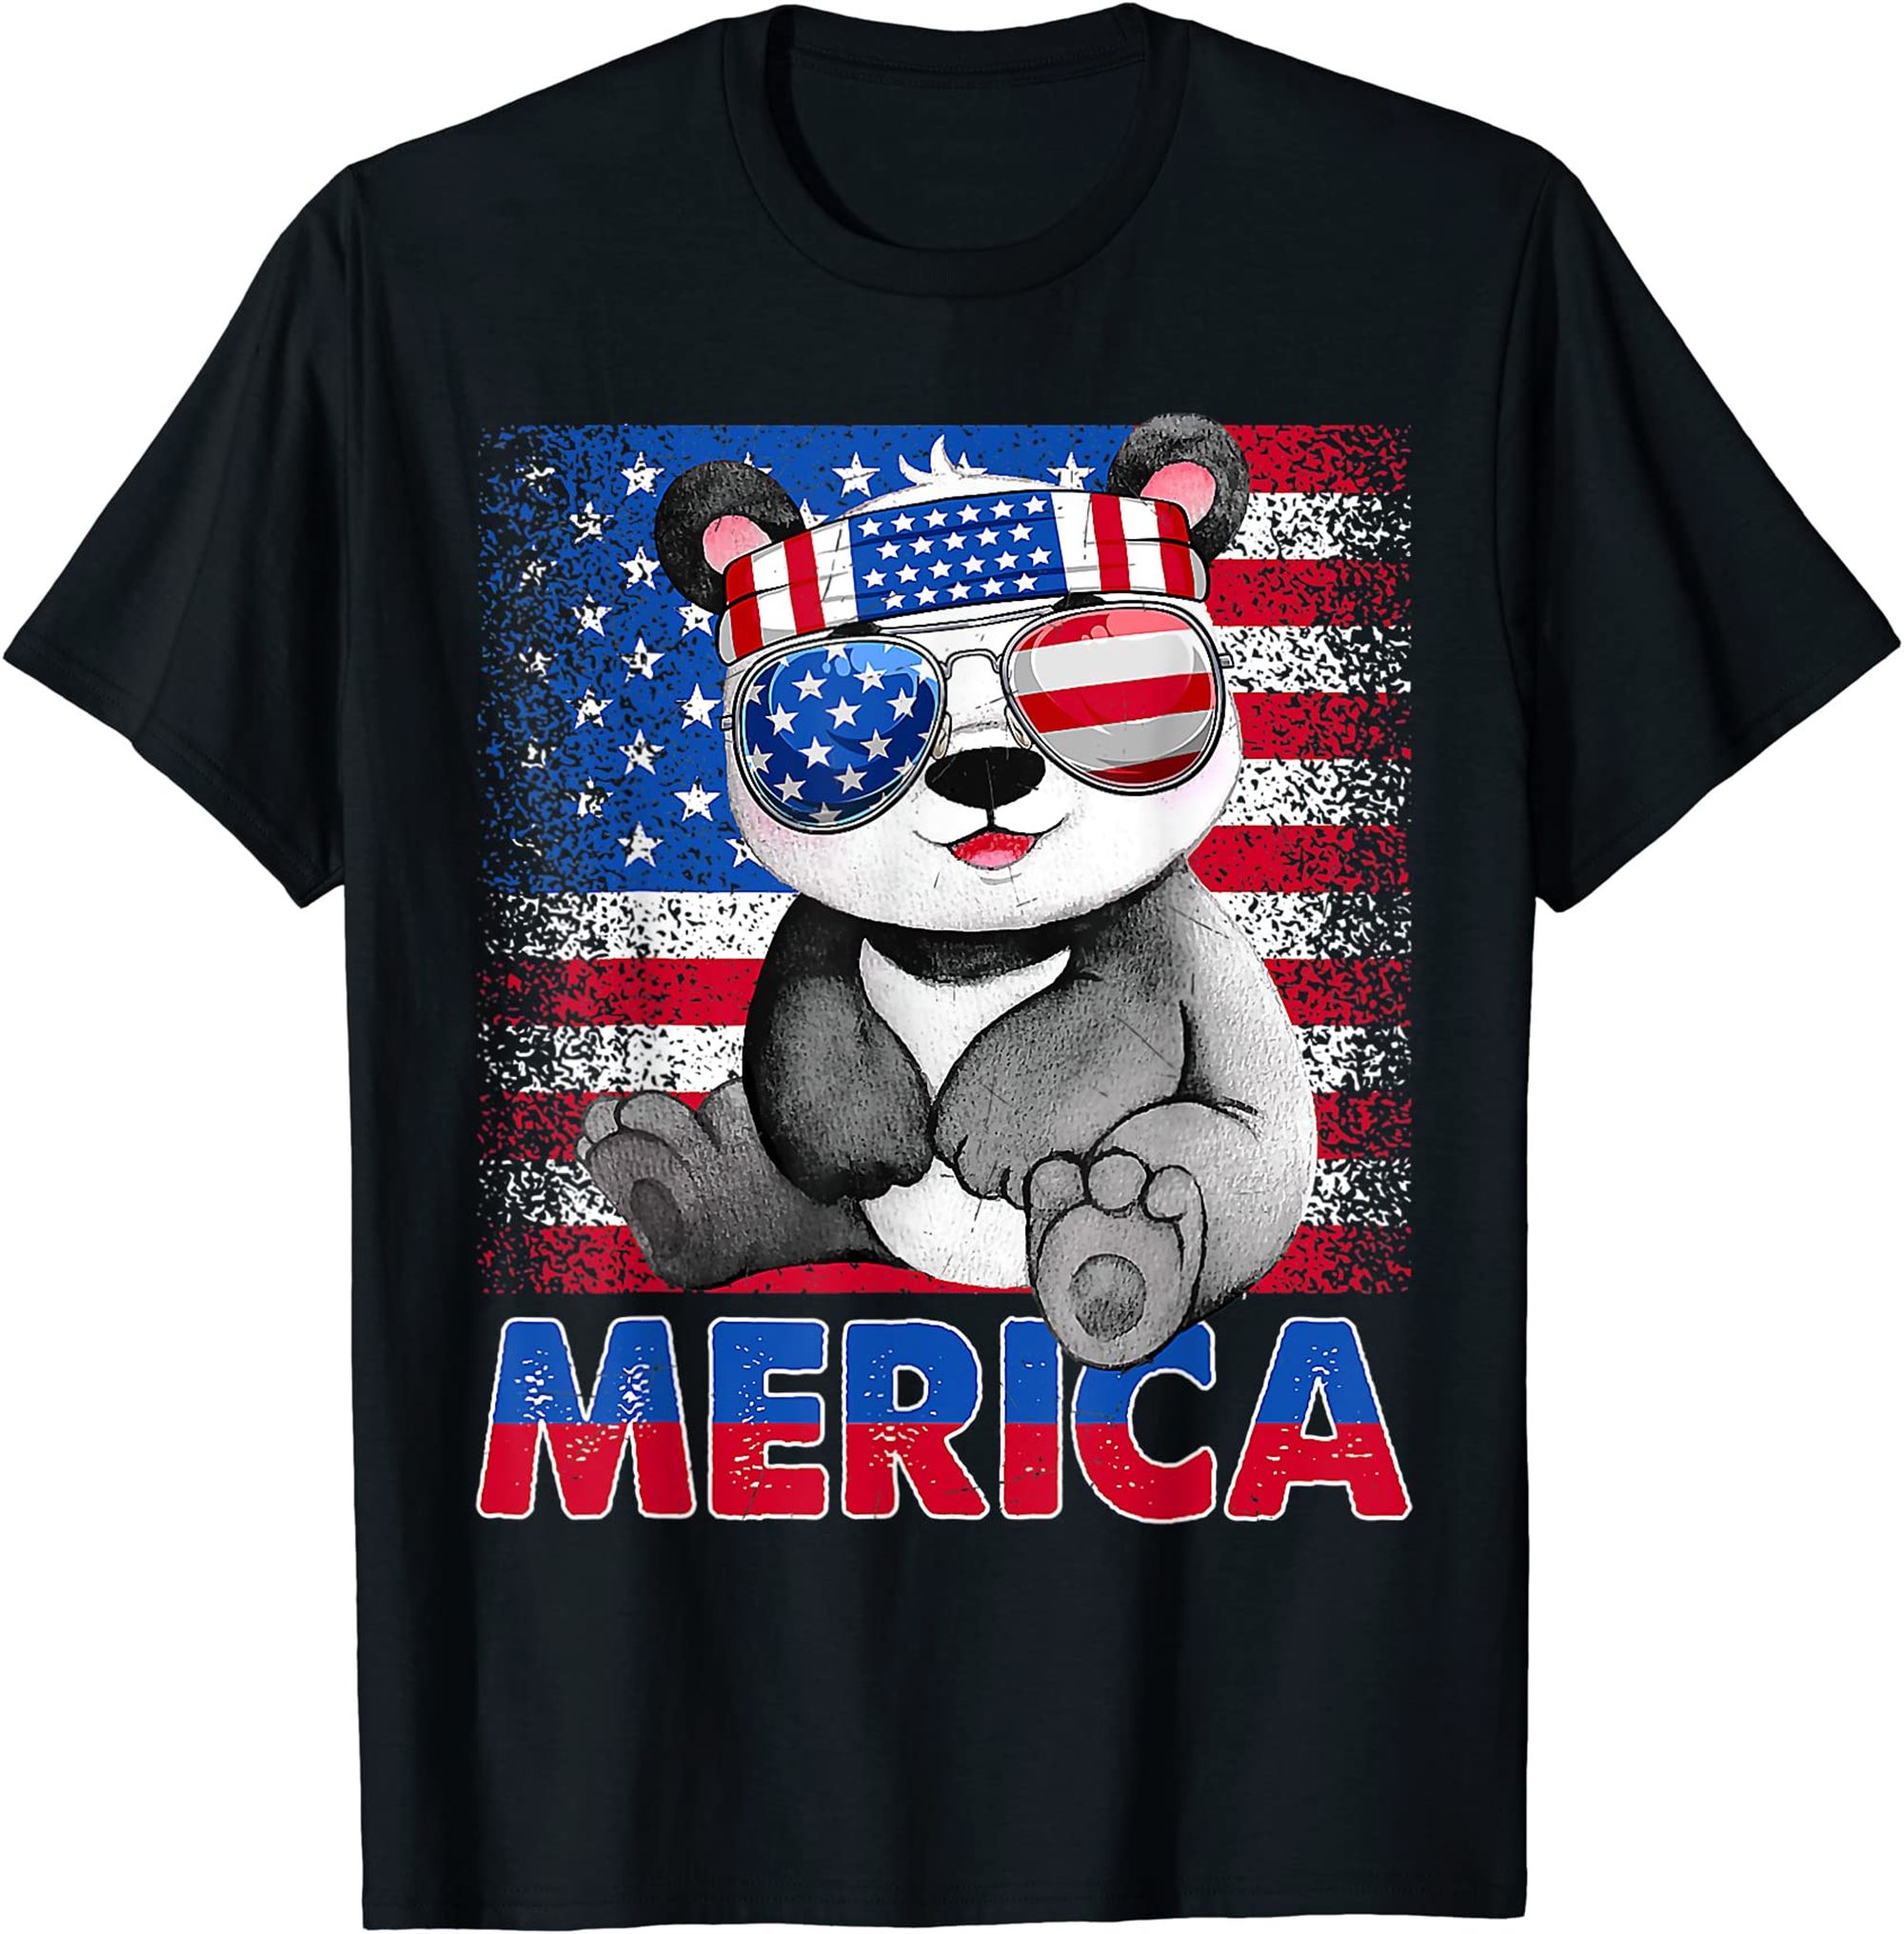 Funny Merica Panda Bear With Usa Flag Headband 4th Of July T-shirt Plus Size Up To 5xl